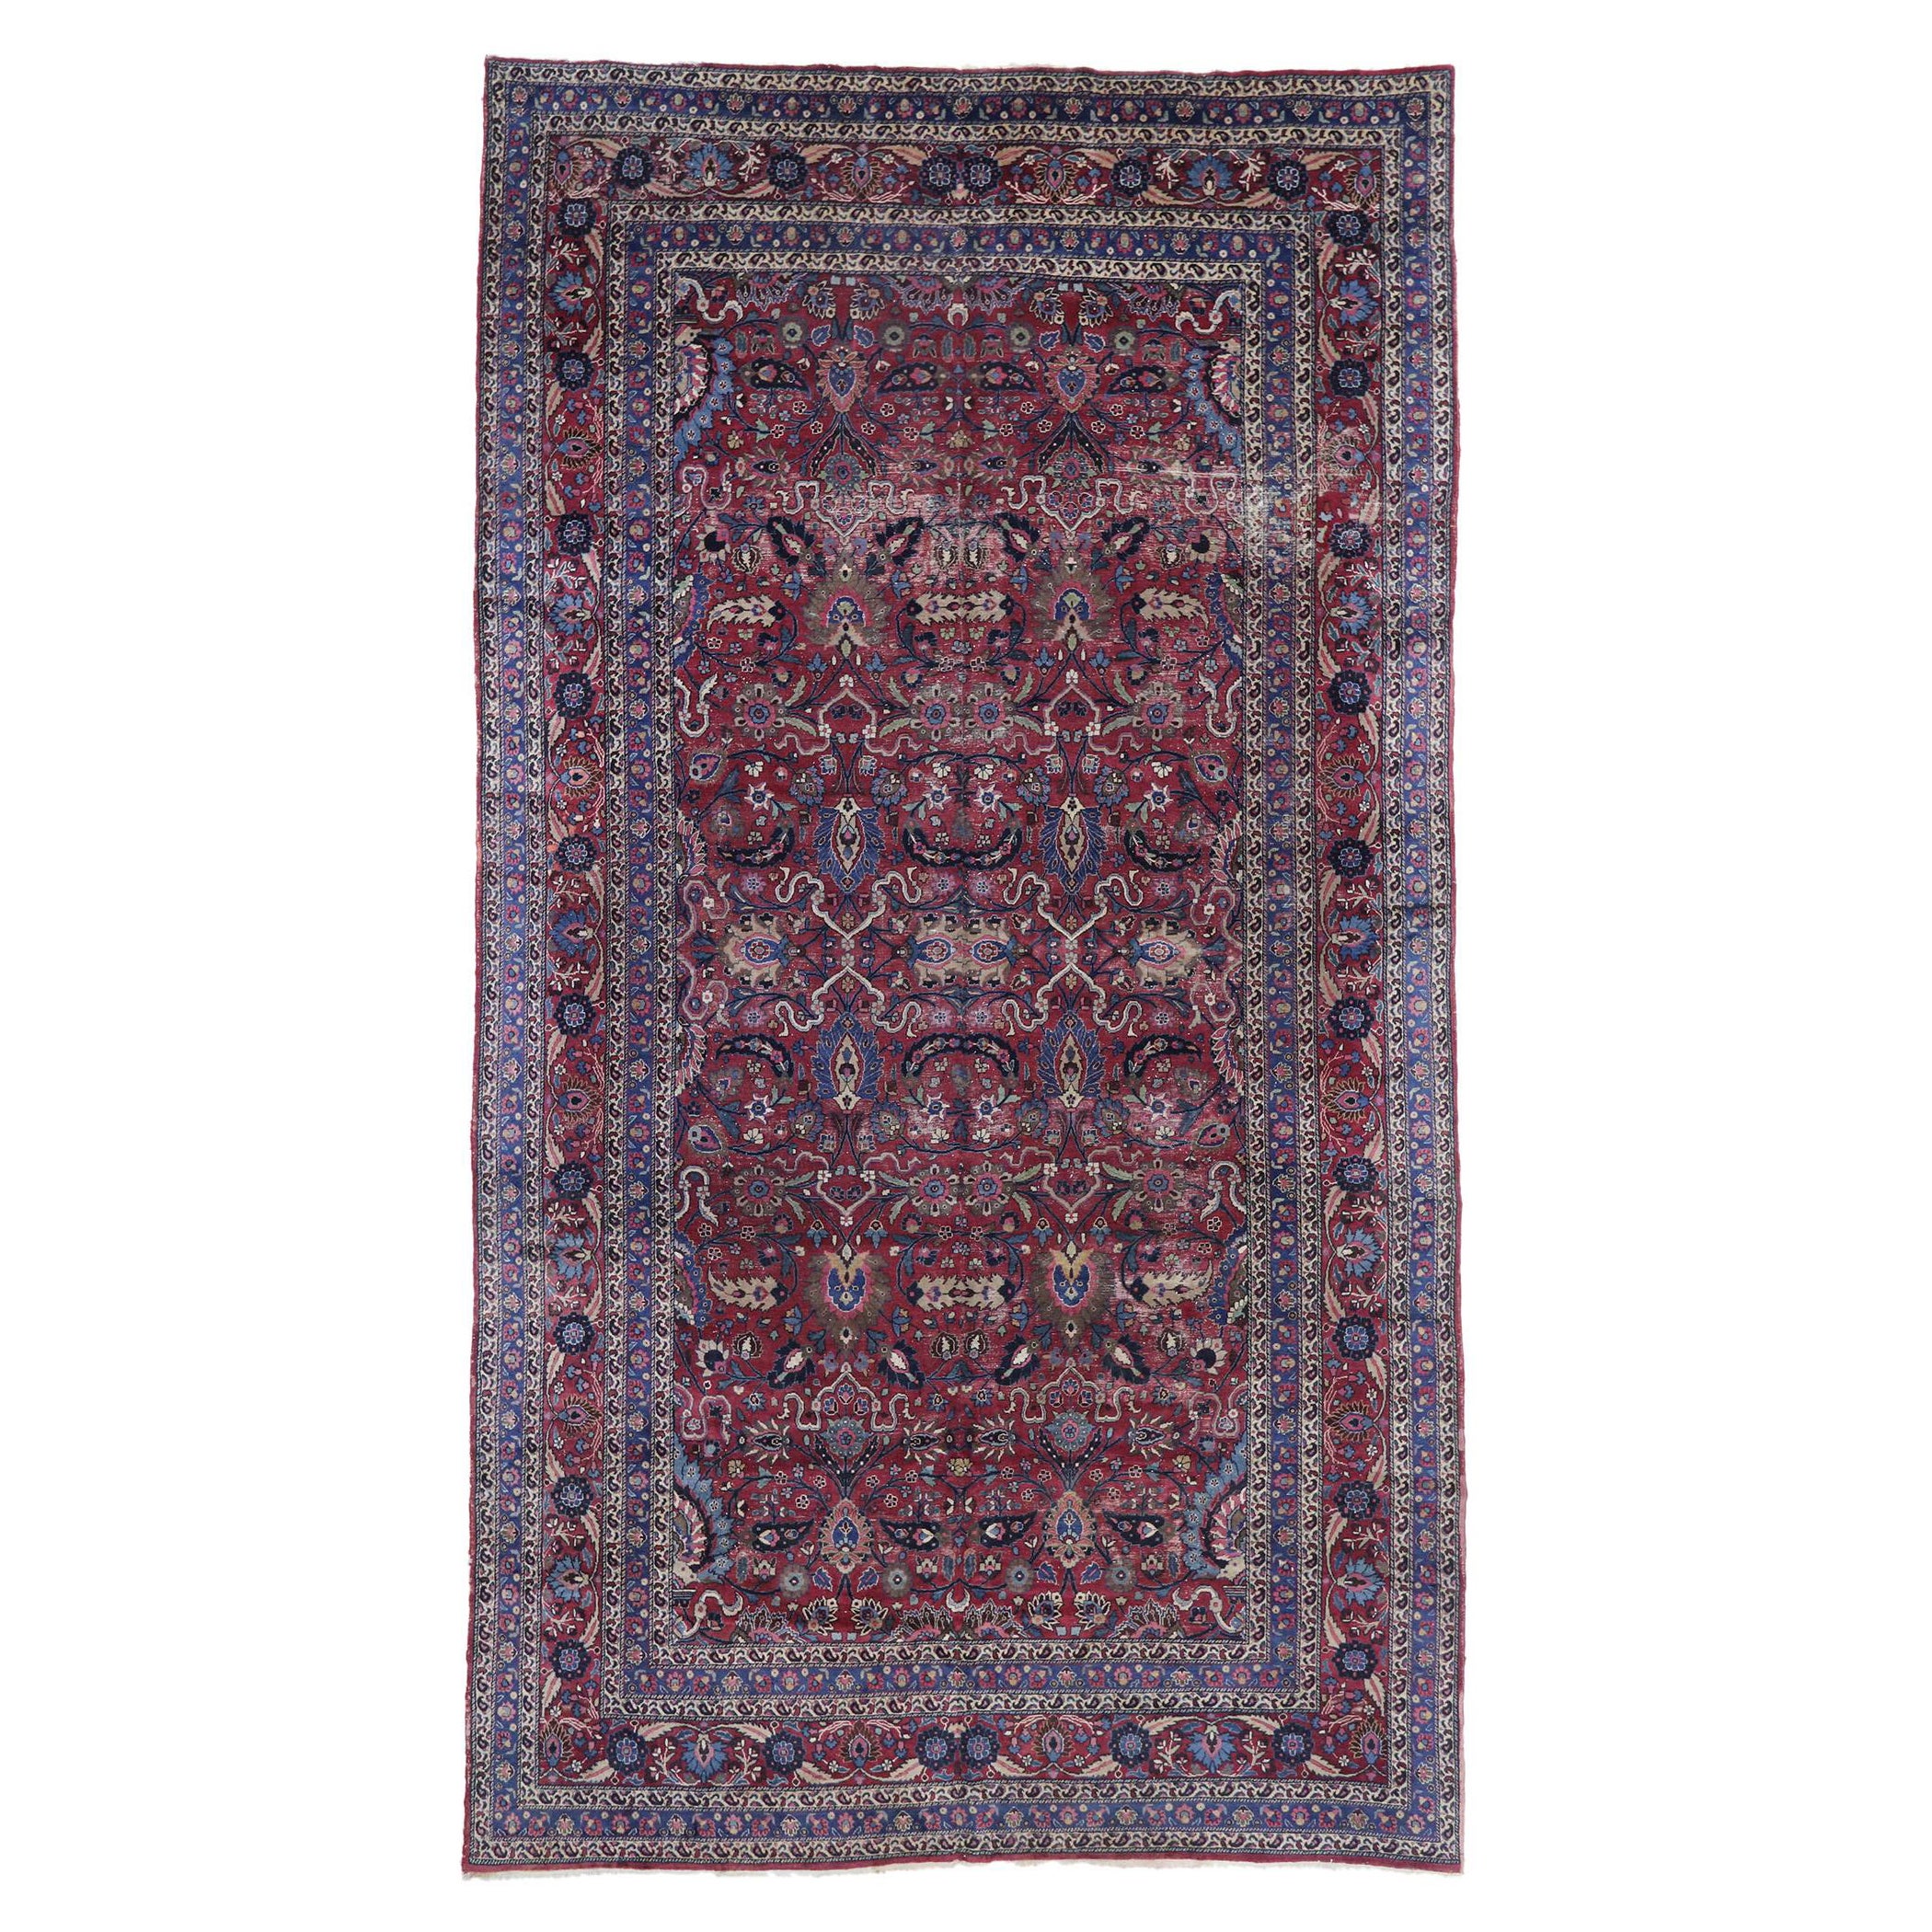 Antique Persian Mashhad Rug with Rustic Victorian Style